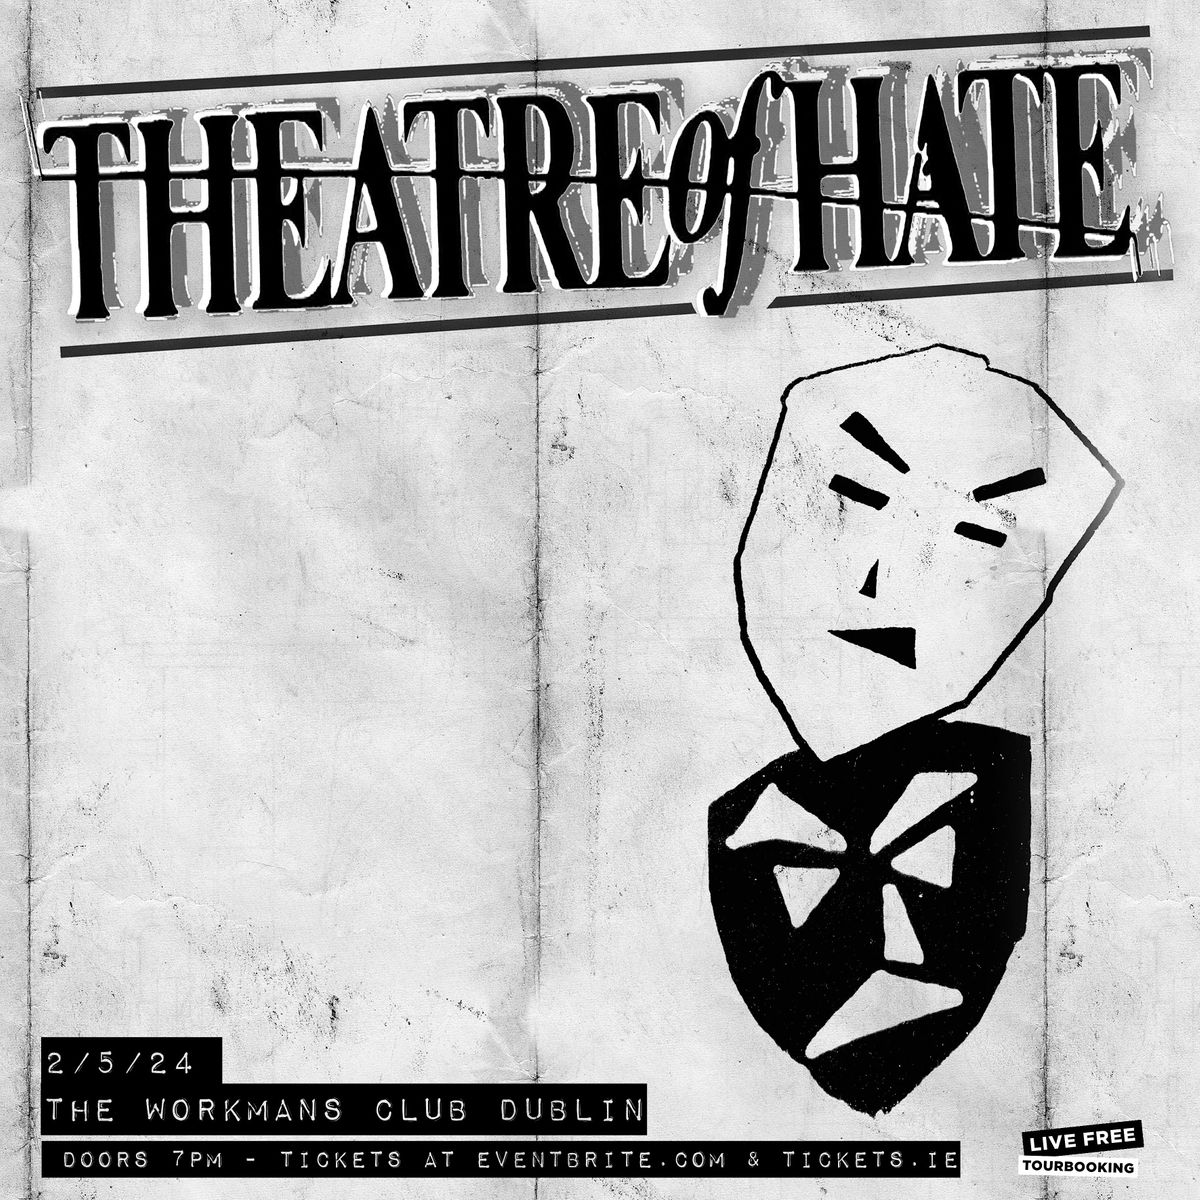 Theatre Of Hate at The Workman's Club Dublin 2\/5\/24